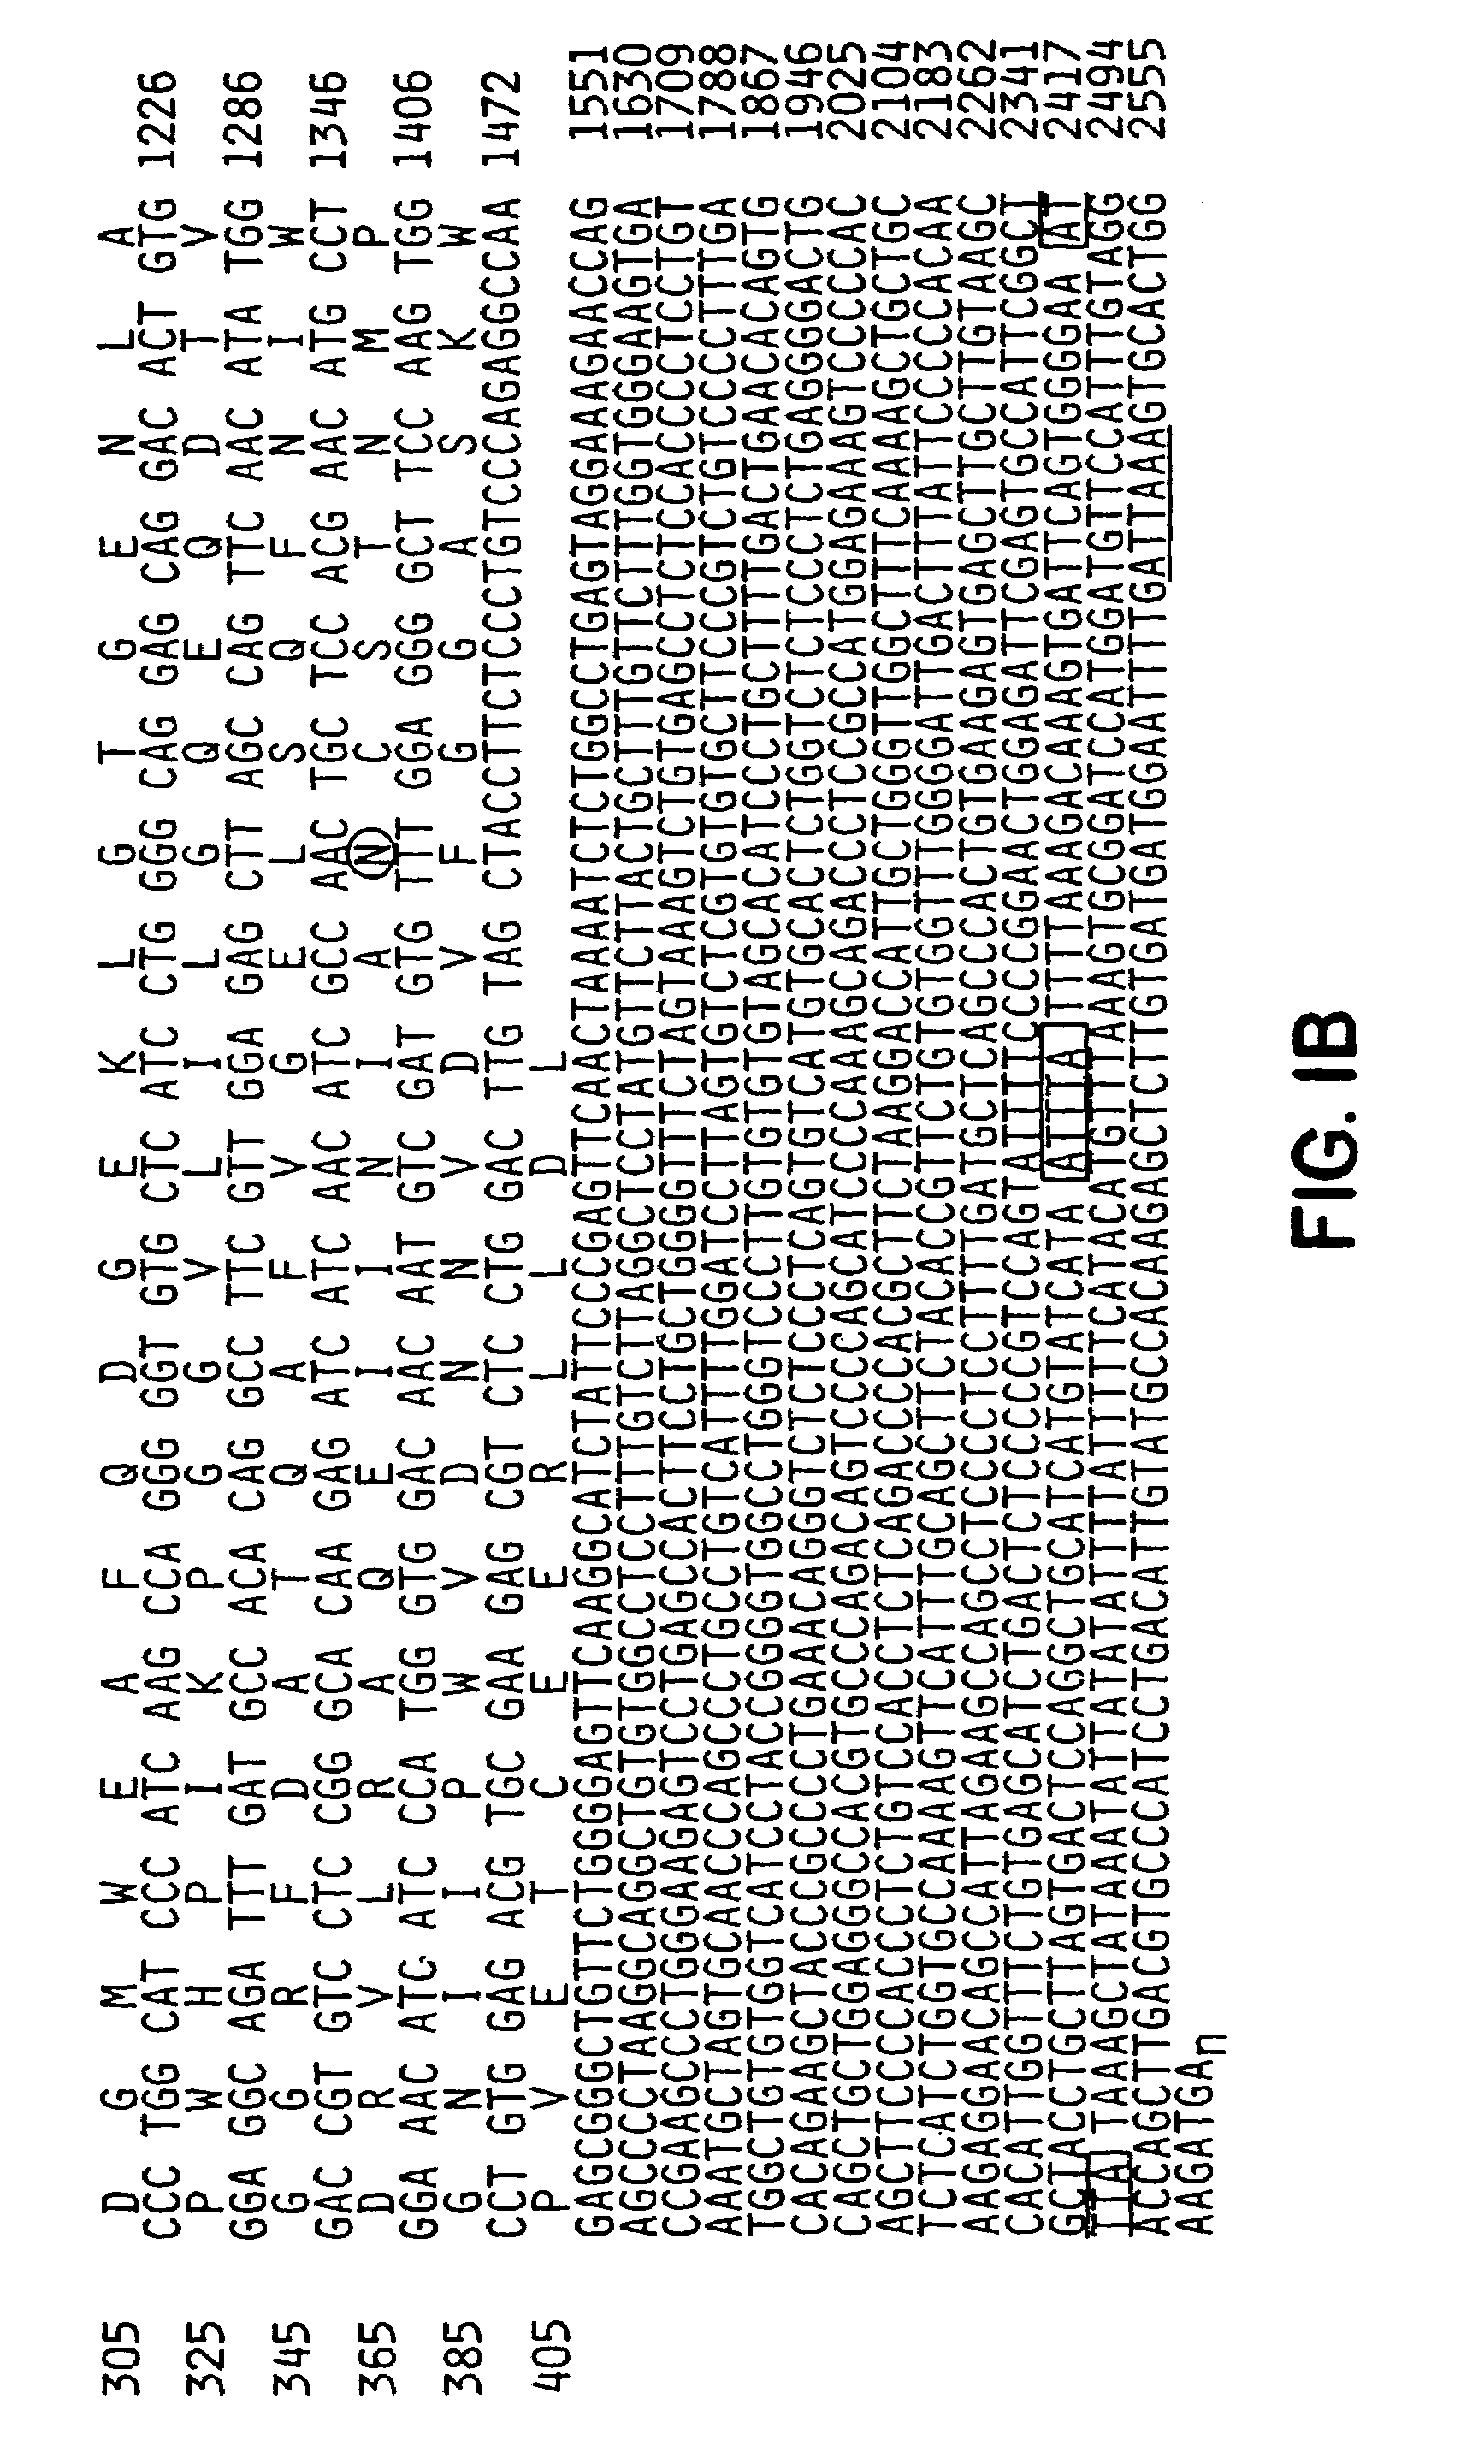 Method for identifying compounds which affect ionotropic glutamate receptor aggregation